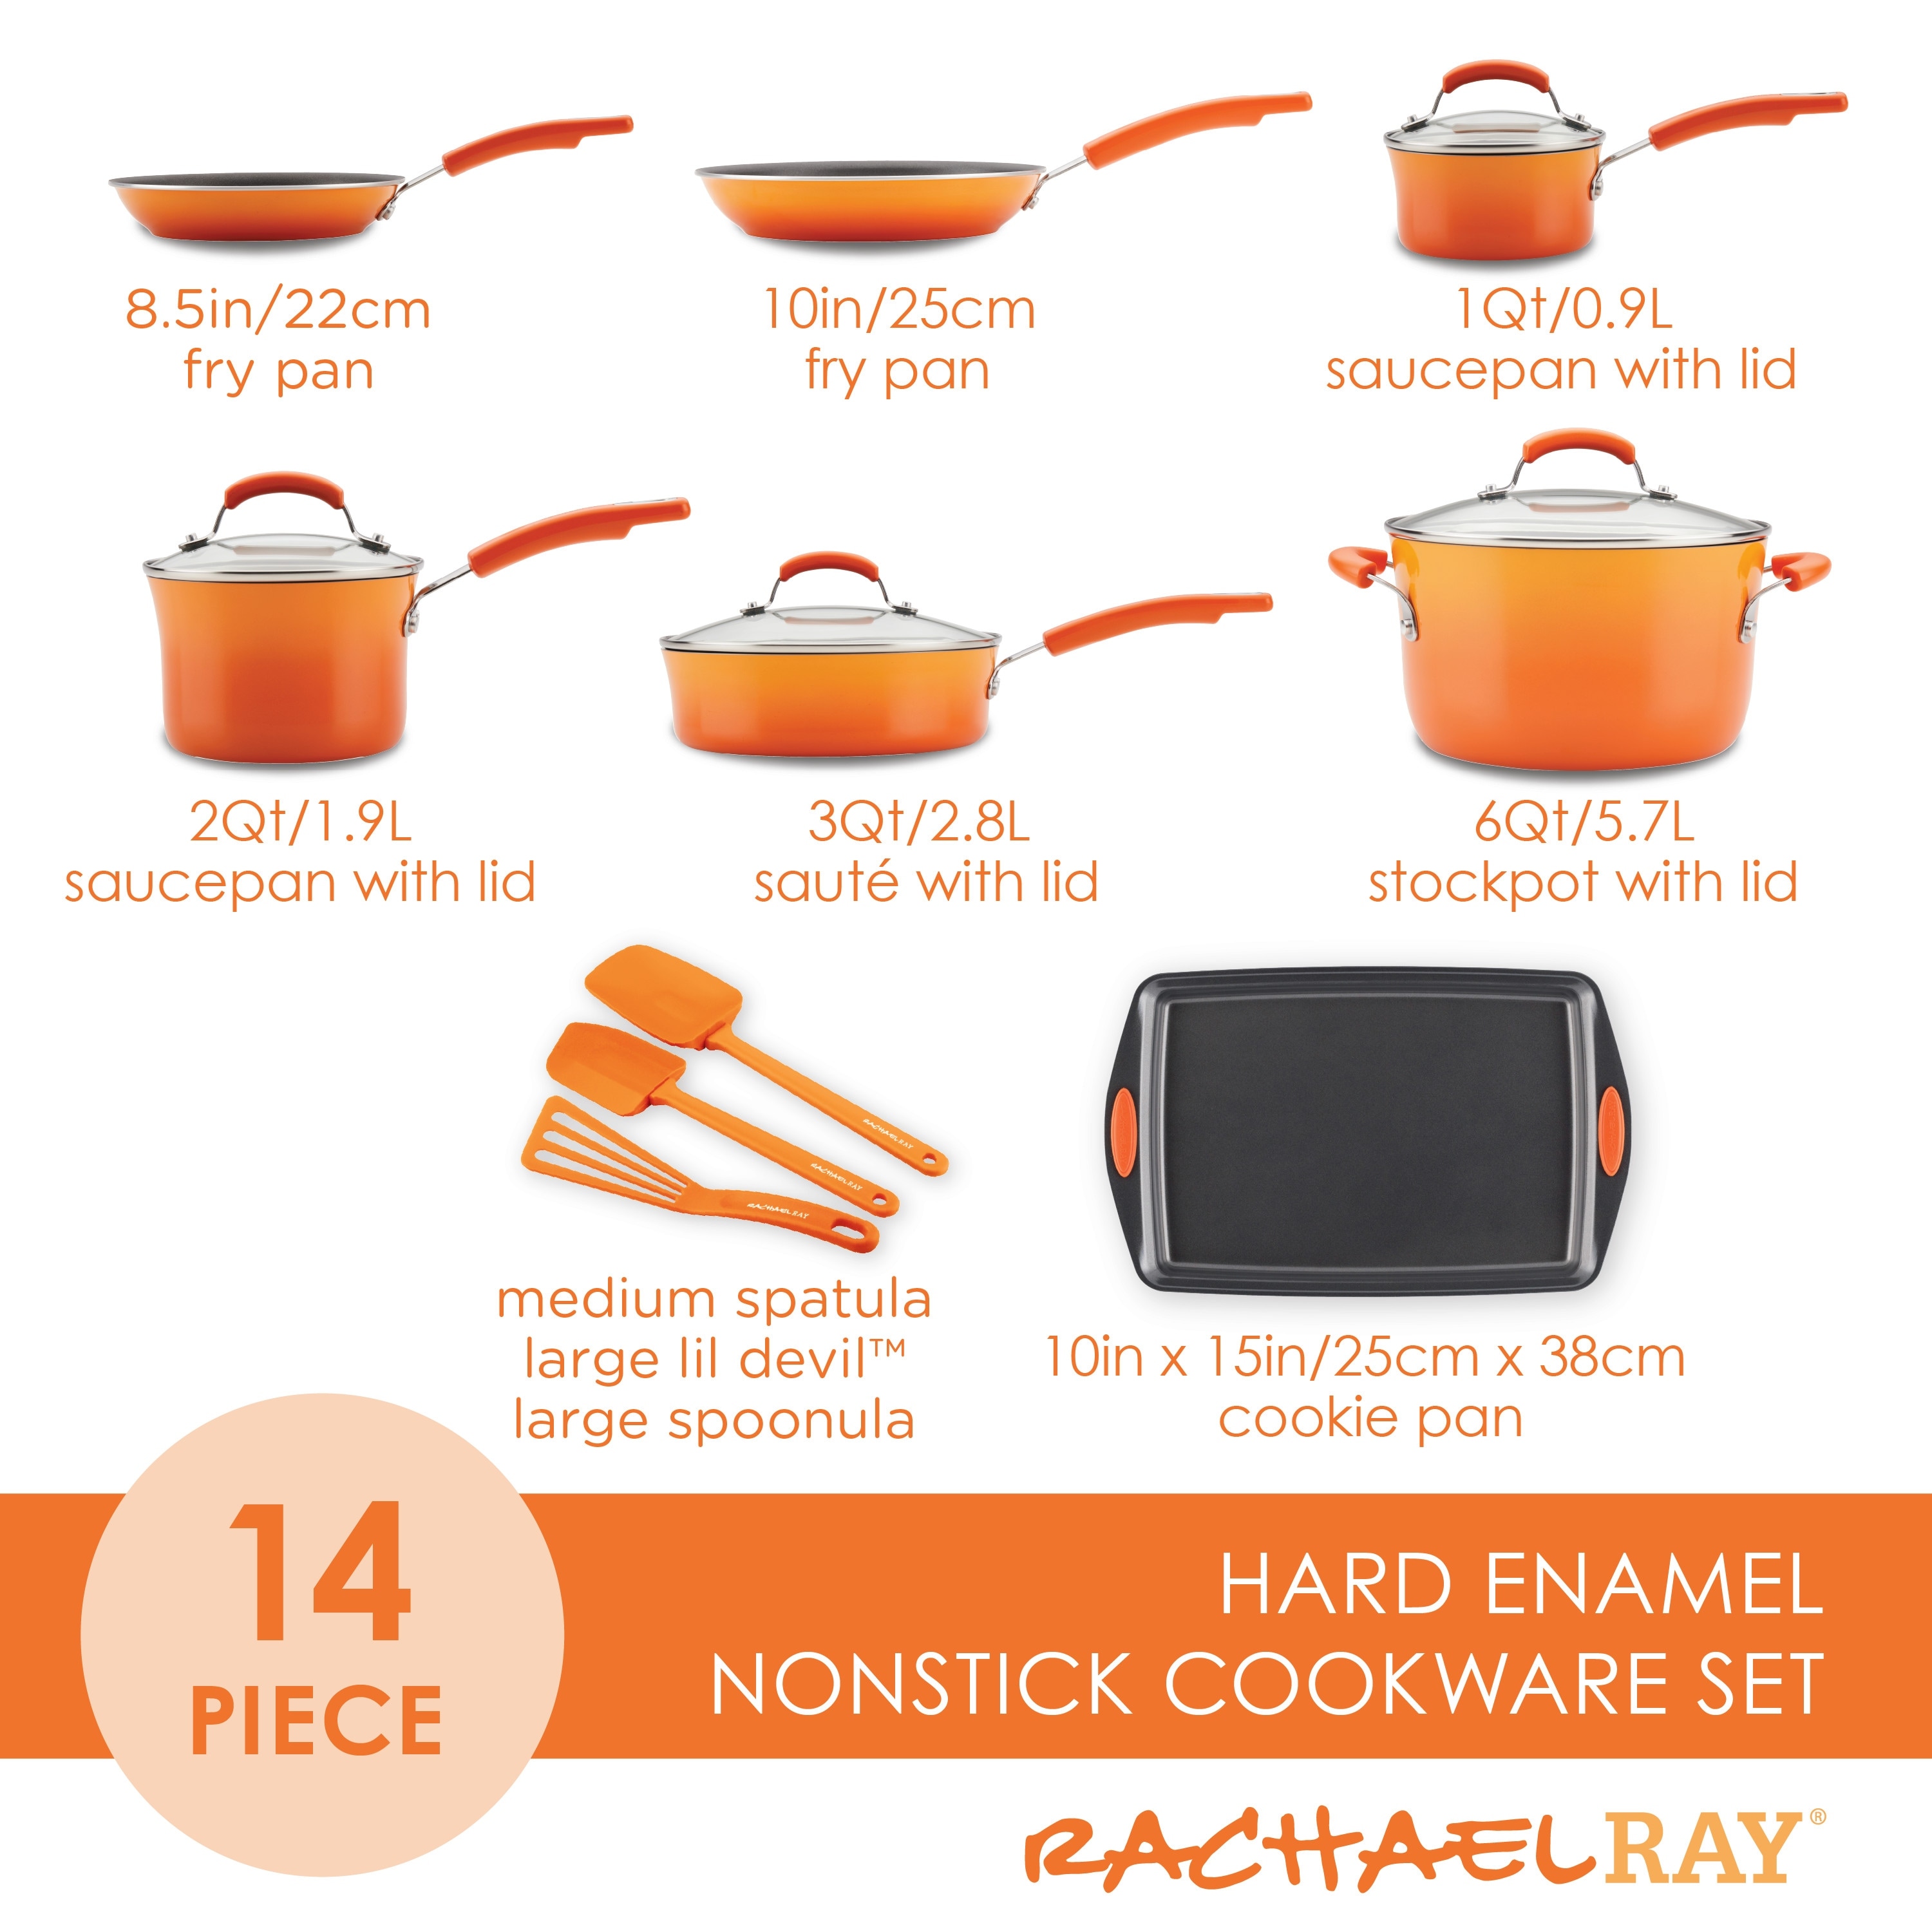 Rachael Ray Classic Brights Porcelain Enamel Nonstick Cookware Set with Bakeware and Utensils, 14-Piece, Gradient Orange